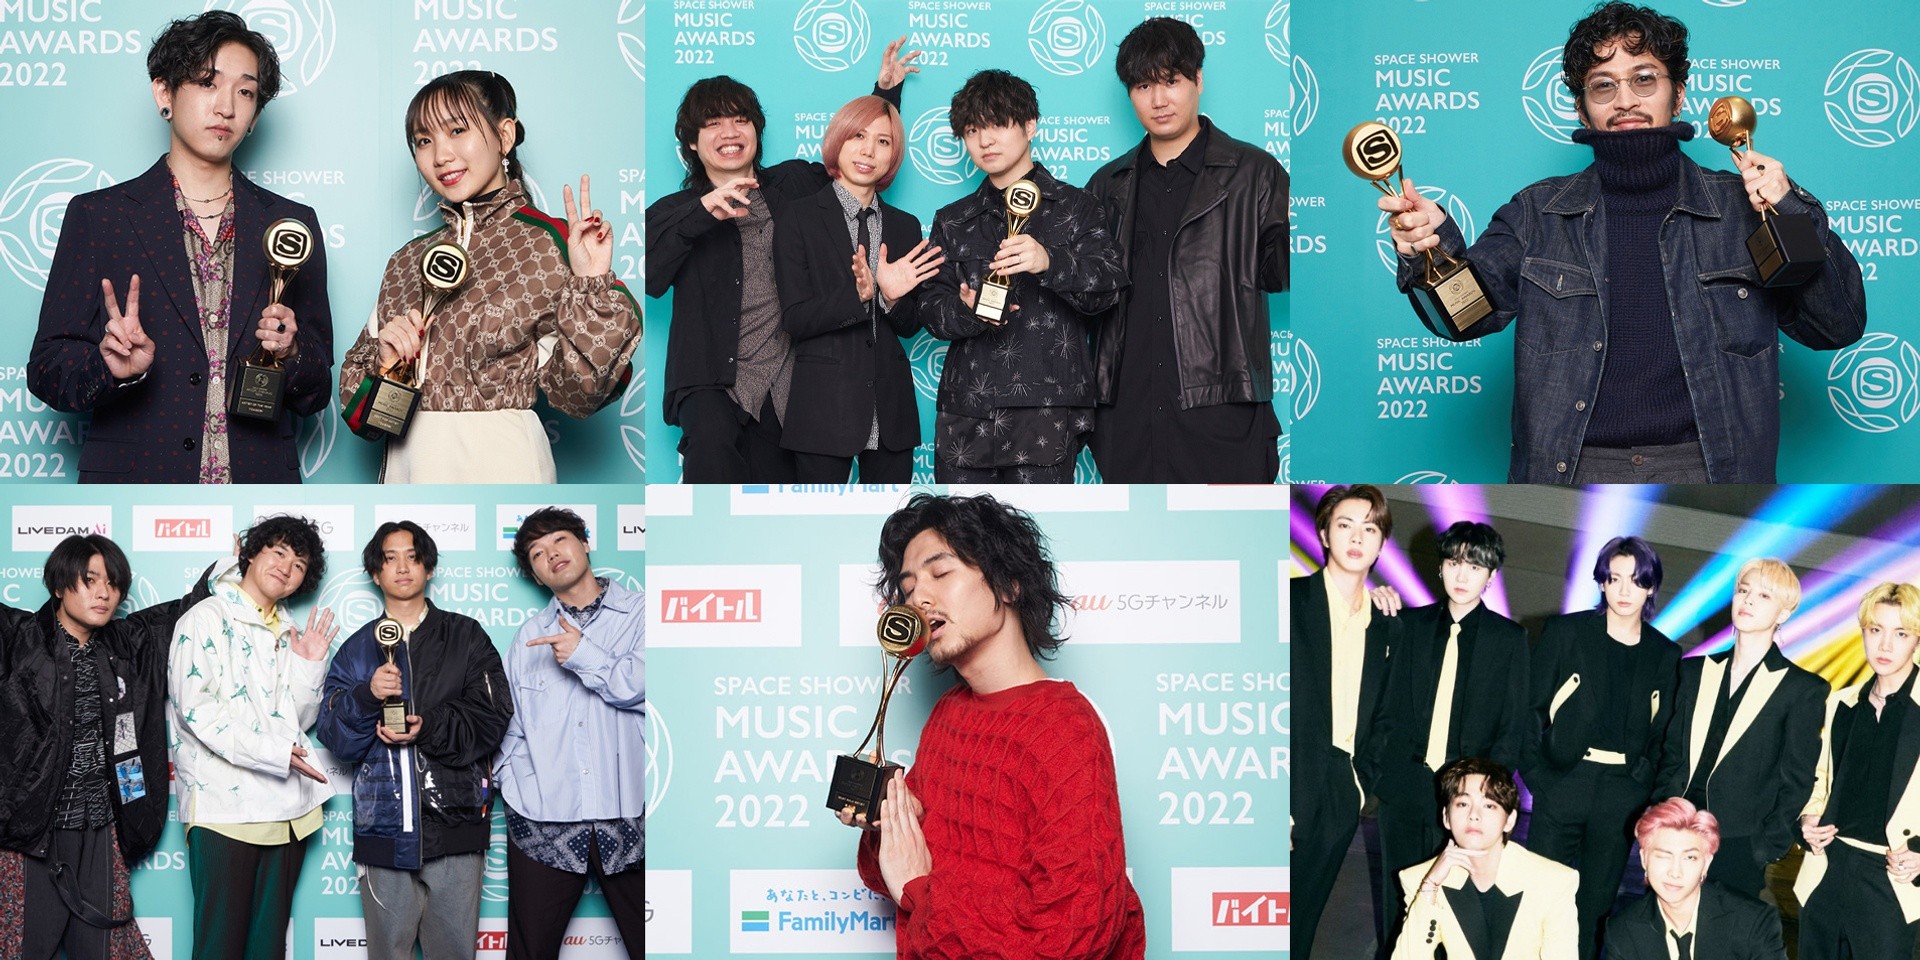 Here are the winners of the SPACE SHOWER MUSIC AWARDS 2022 – YOASOBI, Fujii Kaze, millennium parade, BTS, and more